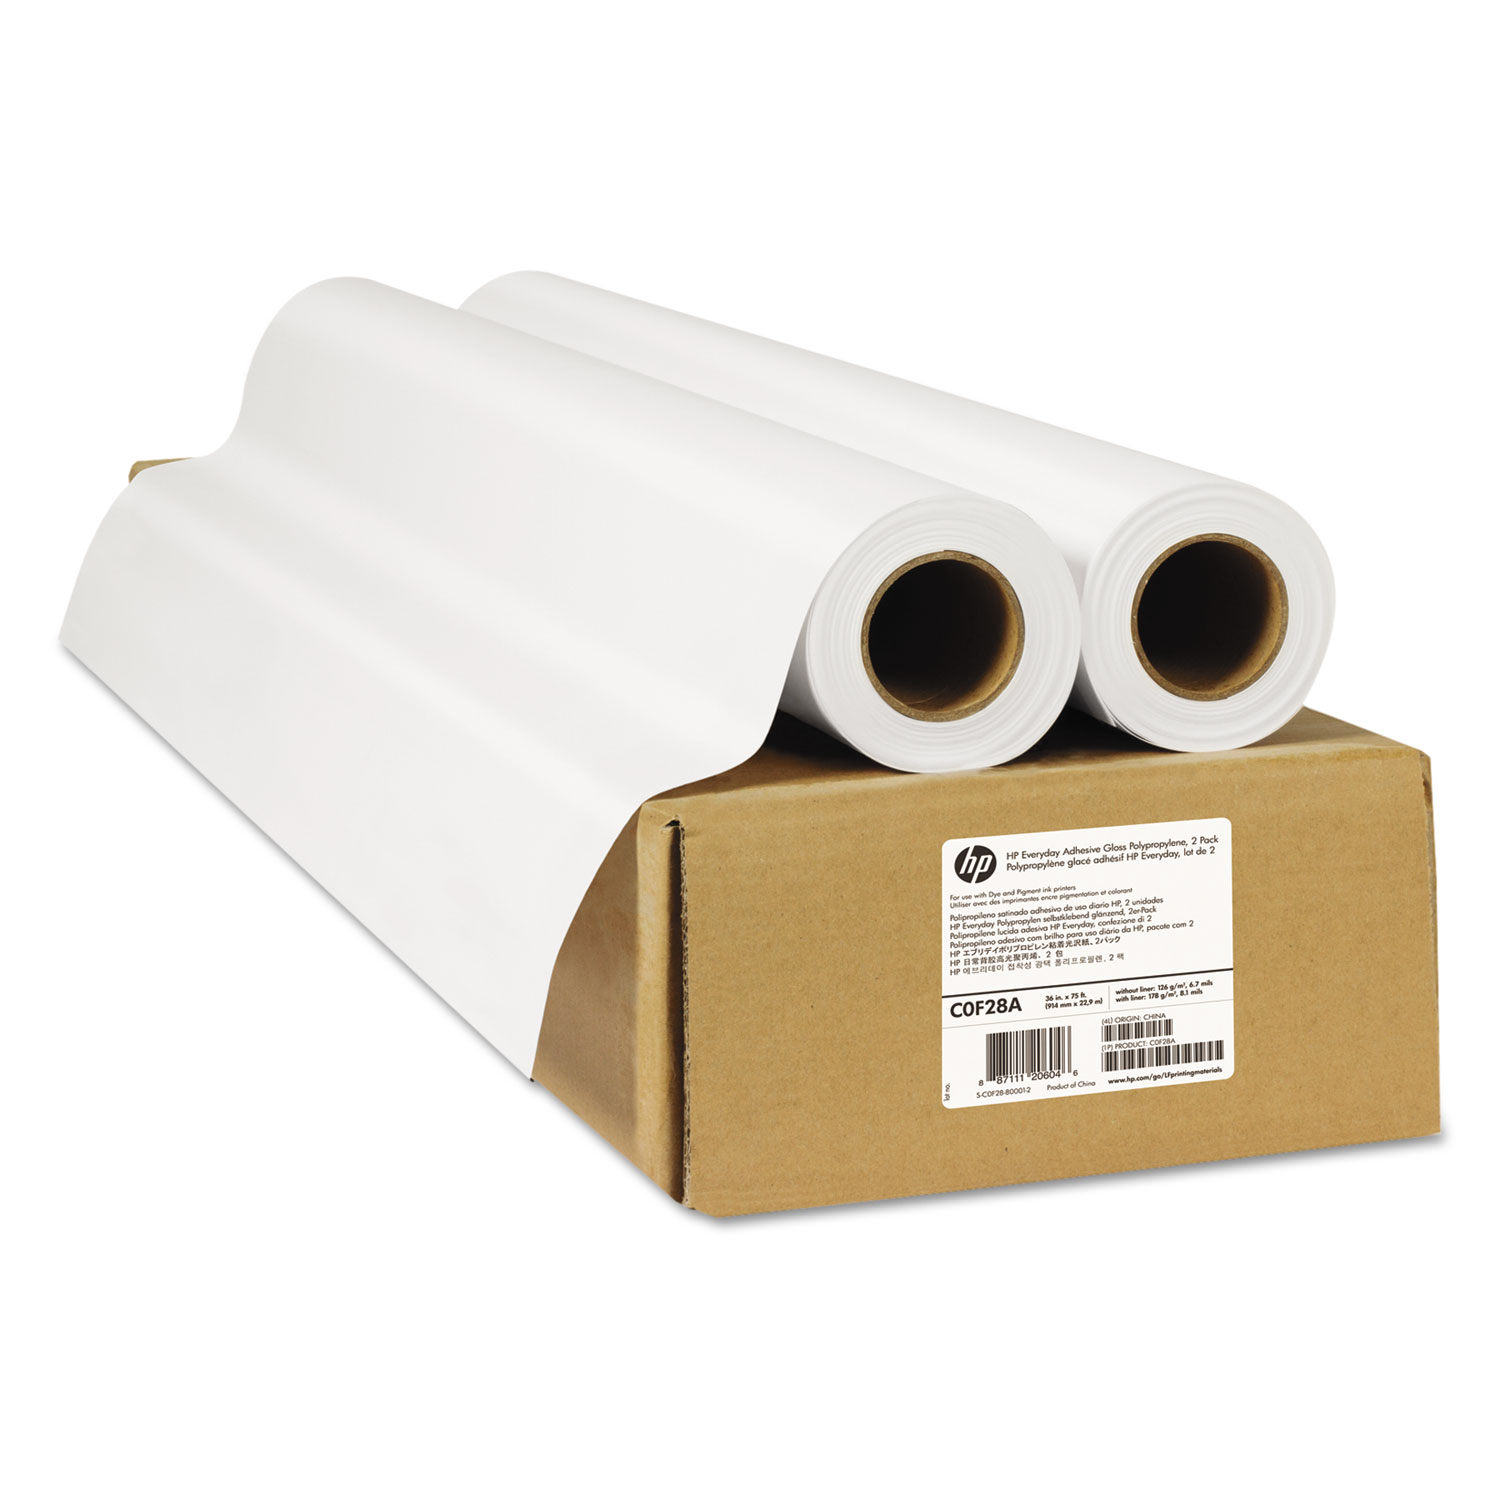 Everyday Adhesive Gloss Polypropylene, 36 x 75 ft., White, 2 Rolls/Pack